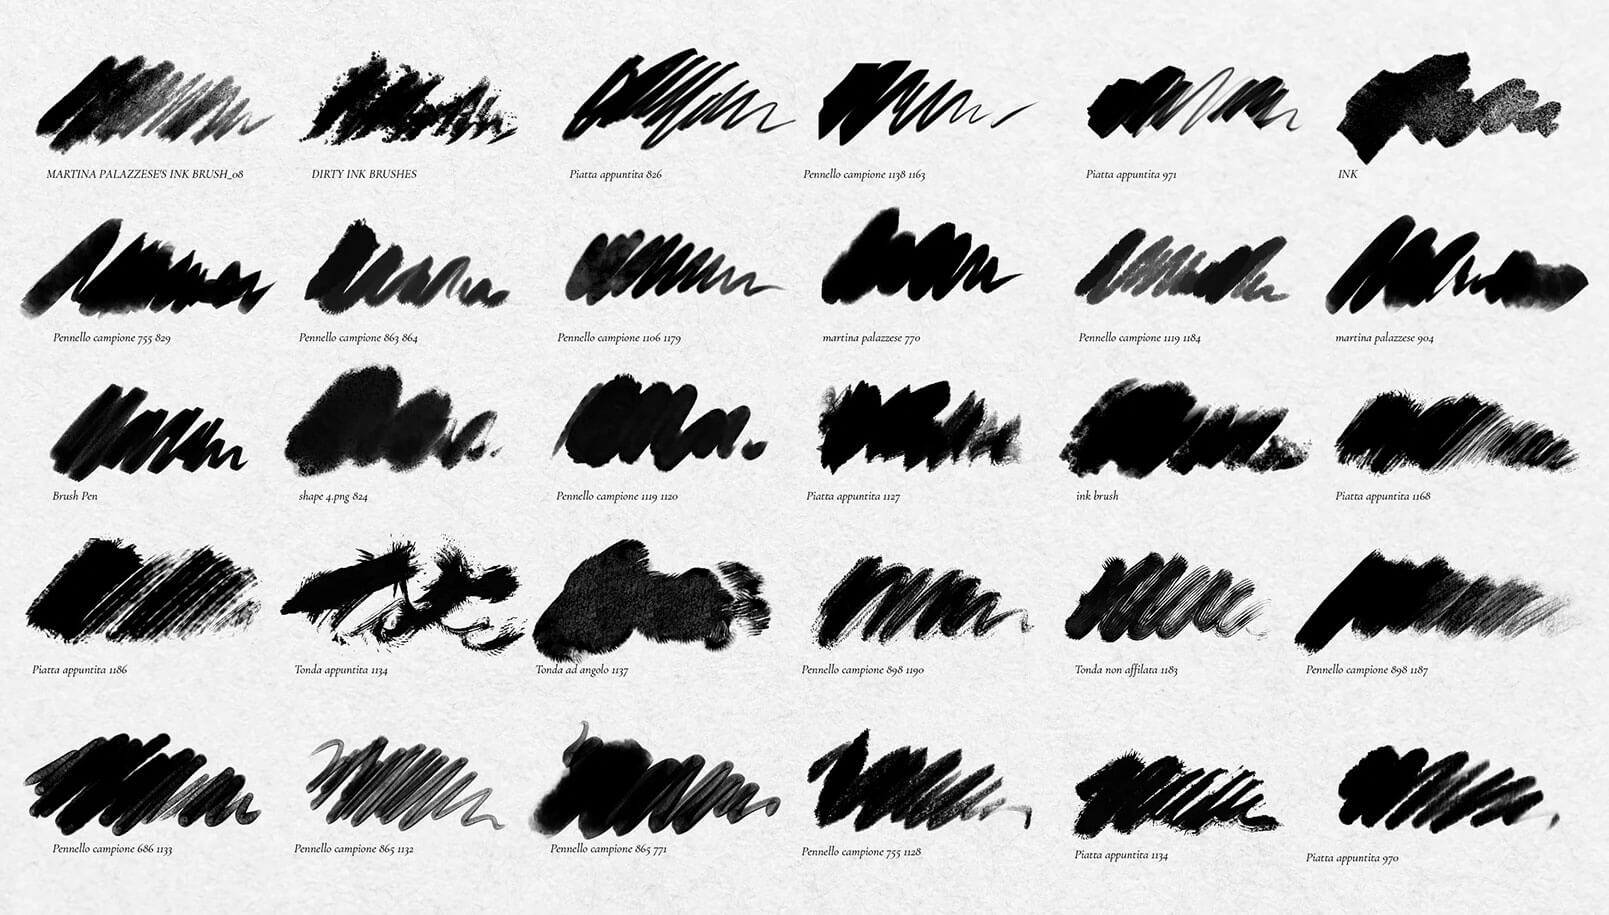 Ink Brushes For Photoshop Free Download